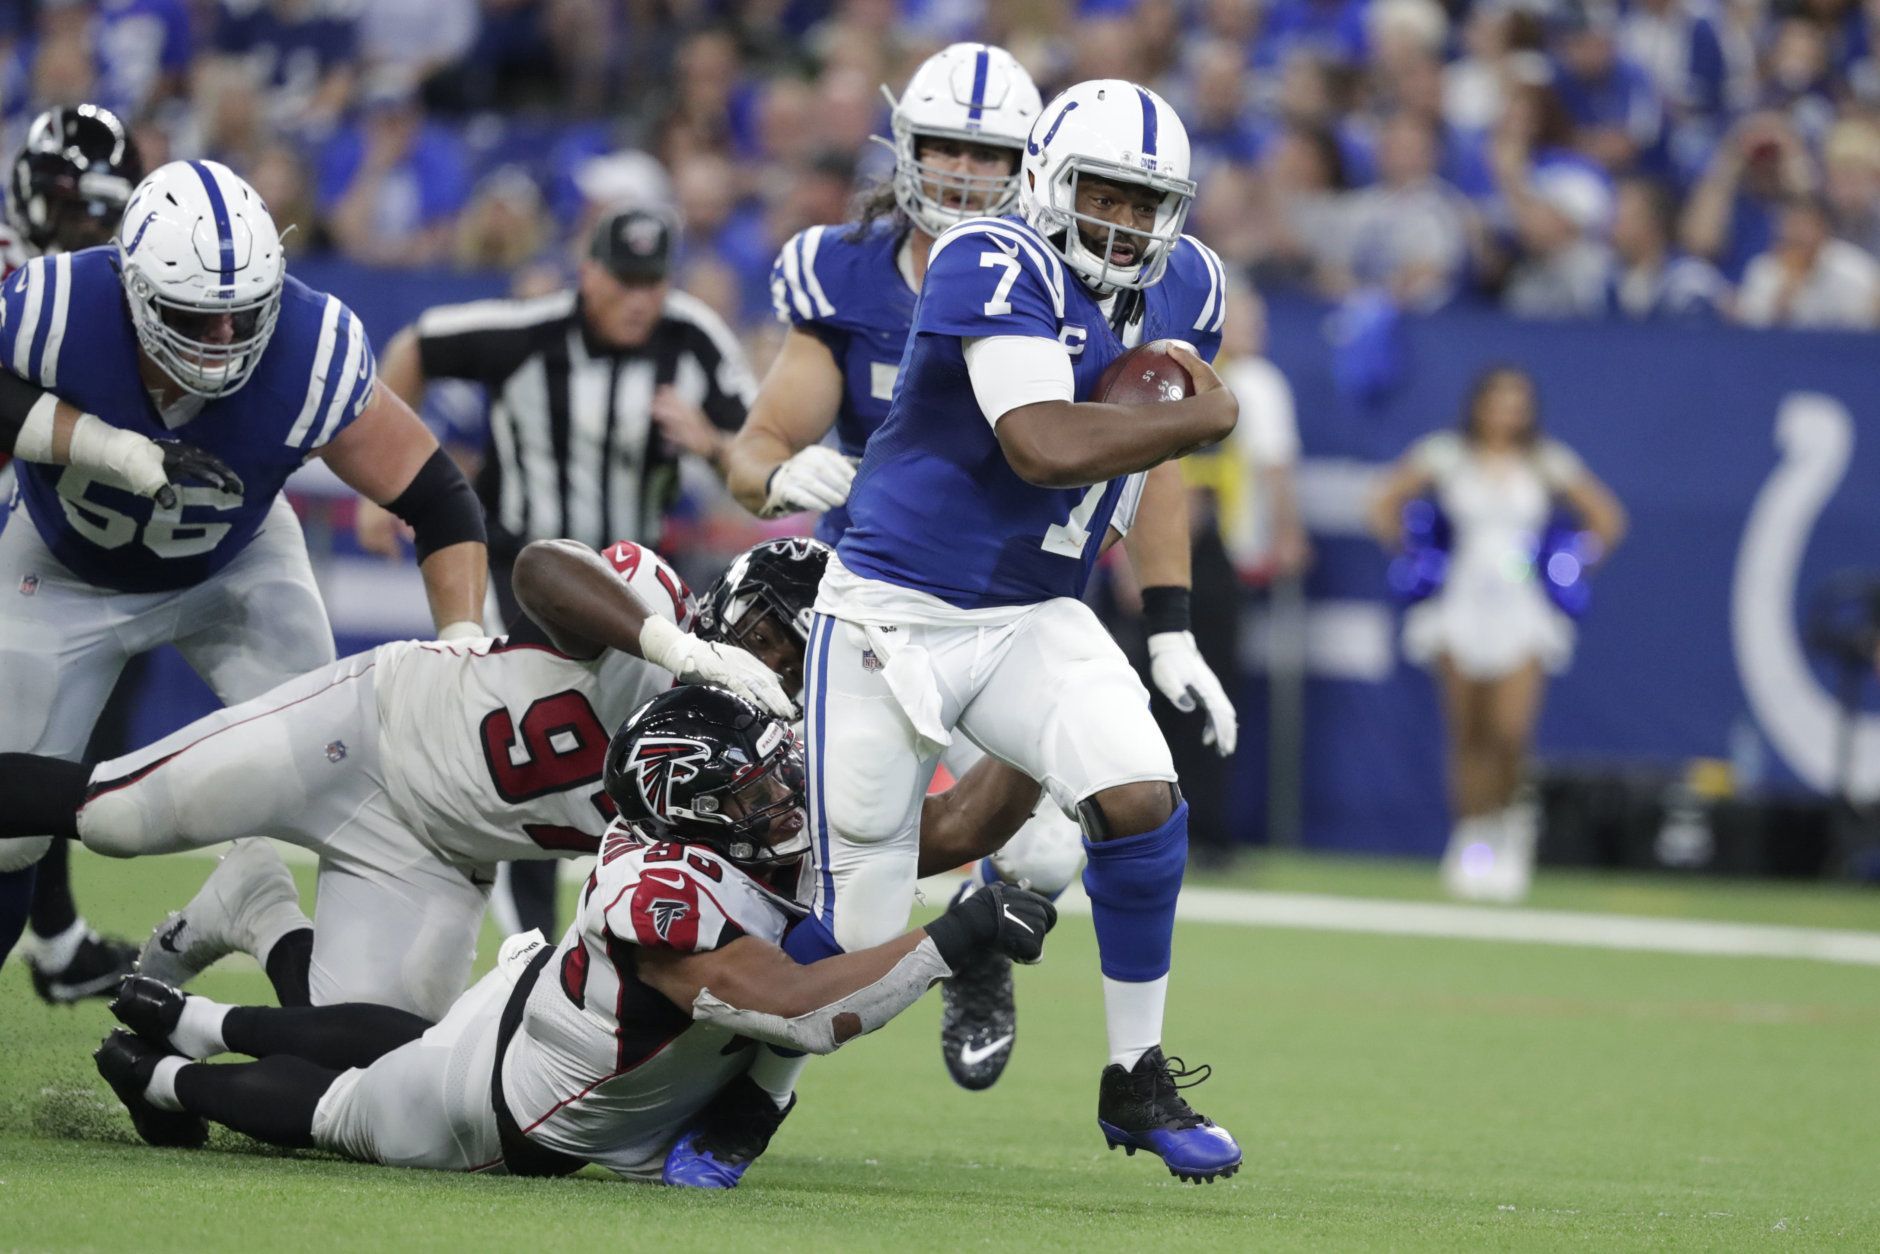 <p><b><i>Falcons 24</i></b><br />
<b><i>Colts 27</i></b></p>
<p>Adam Vinatieri <a href="https://www.indystar.com/story/sports/nfl/colts/2019/09/17/adam-vinatieri-talks-decision-not-retire-indianapolis-colts/2334206001/" target="_blank" rel="noopener" data-saferedirecturl="https://www.google.com/url?q=https://www.indystar.com/story/sports/nfl/colts/2019/09/17/adam-vinatieri-talks-decision-not-retire-indianapolis-colts/2334206001/&amp;source=gmail&amp;ust=1569294743341000&amp;usg=AFQjCNEYB6KdMNYVUj5vyTNxCox2wtqQMg">got the demons out</a>, Jacoby Brissett looked more like an MVP than Matt Ryan, and Indianapolis is off to its best start since 2013. Andrew who?</p>
<p>And though it&#8217;s still mathematically possible for Atlanta to live up to <a href="https://wtop.com/gallery/nfl/2019-nfl-playoff-predictions/" target="_blank" rel="noopener">my lofty expectations</a>, Ryan&#8217;s uninspiring start to the season and Keanu Neal&#8217;s injury (and the ensuing <a href="https://profootballtalk.nbcsports.com/2019/09/22/falcons-safety-keanu-neal-penalized-as-hes-being-carted-off/" target="_blank" rel="noopener" data-saferedirecturl="https://www.google.com/url?q=https://profootballtalk.nbcsports.com/2019/09/22/falcons-safety-keanu-neal-penalized-as-hes-being-carted-off/&amp;source=gmail&amp;ust=1569294743341000&amp;usg=AFQjCNHc0j0k1VM_0Xl3YuMJEaQ-Vct28A">insult to the injury</a>) have me rethinking my <a href="https://wtop.com/nfl/2019/09/2019-nfc-south-preview/">second-boldest prediction of 2019</a>.</p>
